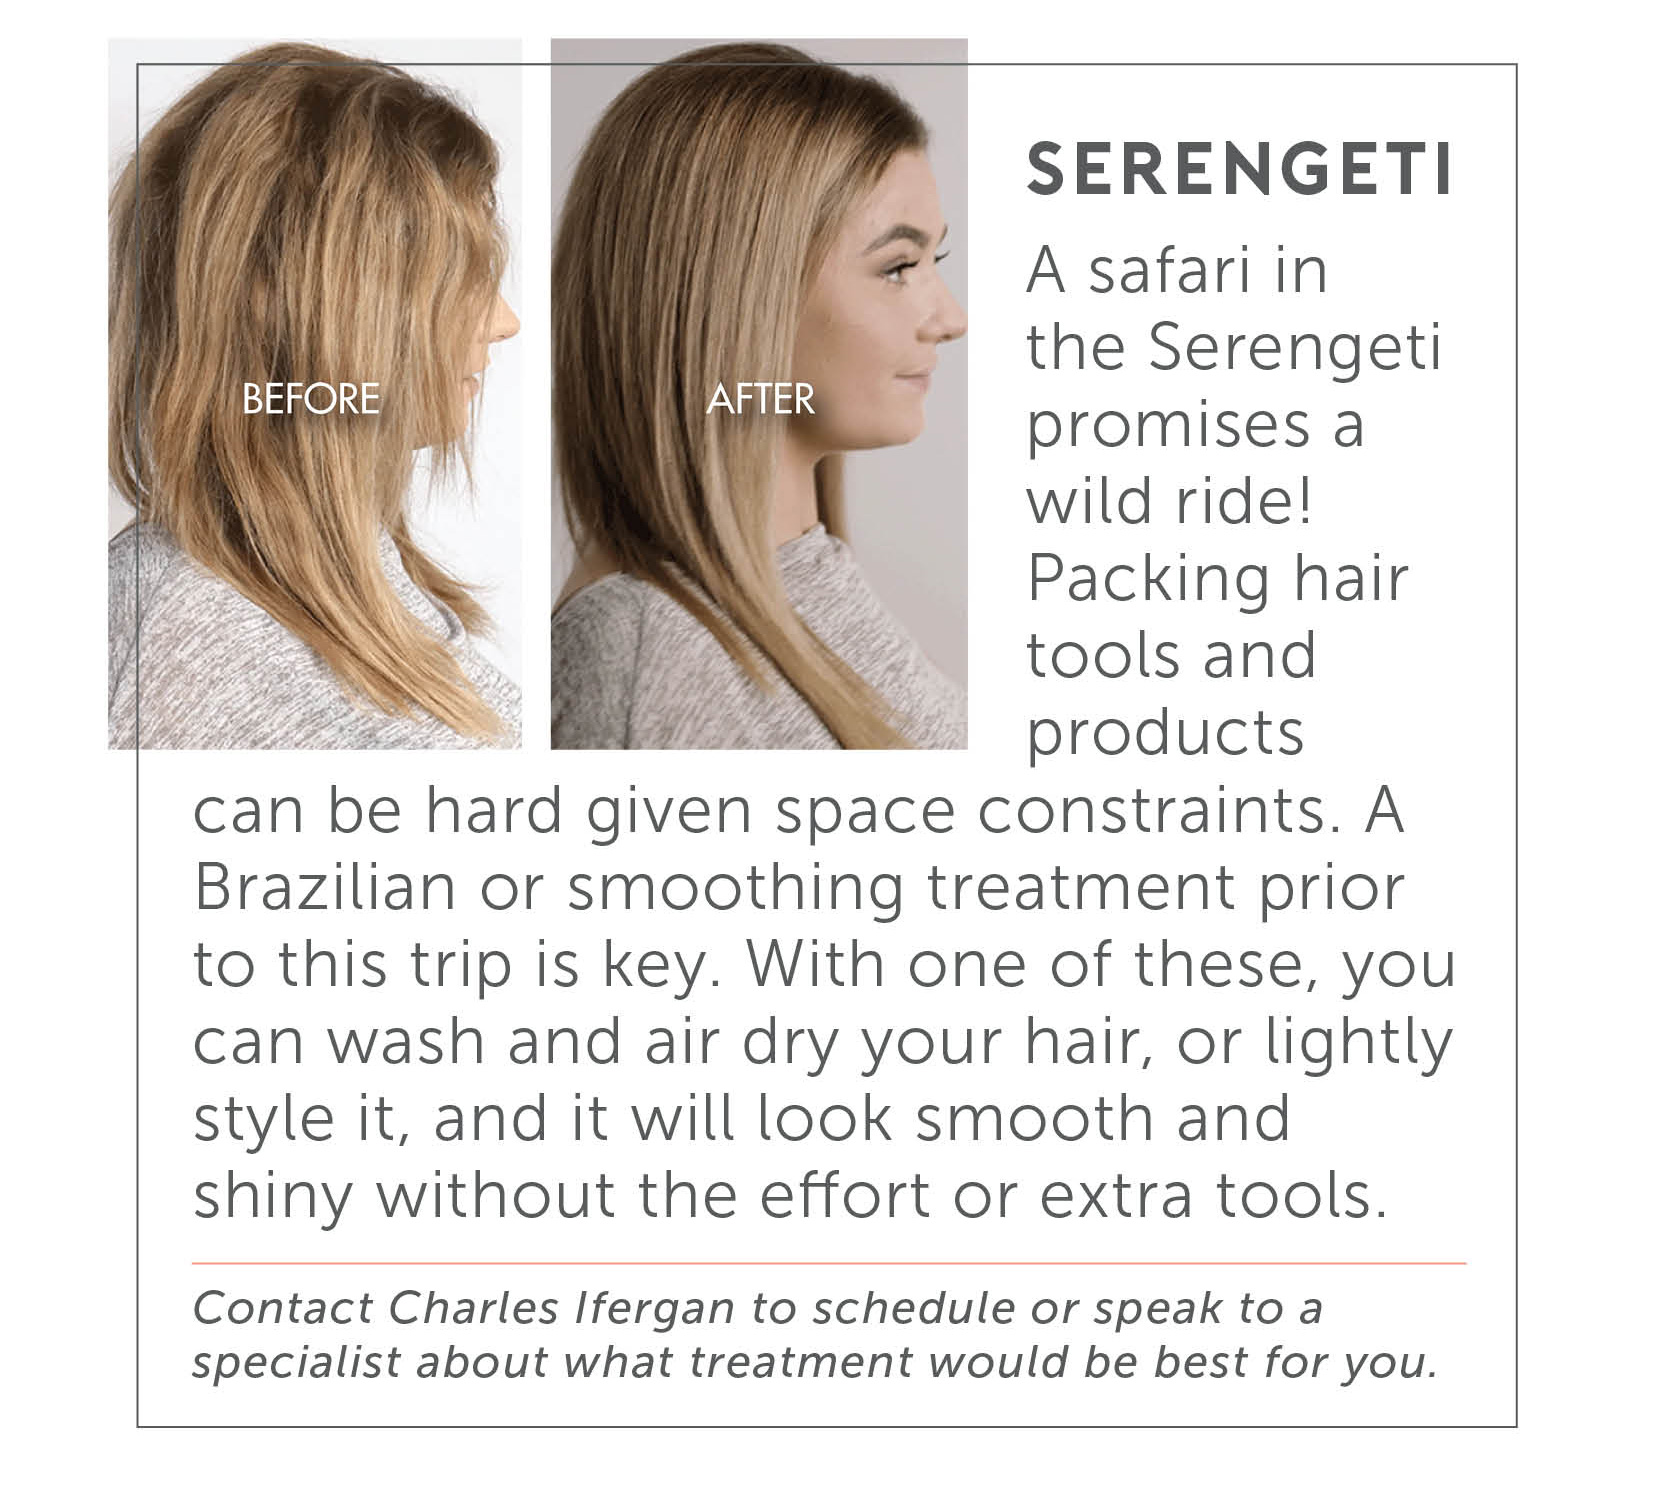 Serengeti - A safari in the Serengeti promises a wild ride! Packing hair tools and products can be hard given space constraints. A Brazilian or smoothing treatment prior to this trip is key. With one of these, you can wash and air dry your hair, or lightly style it, and it will look smooth and shiny without the effort or extra tools. Contact Charles Ifergan to schedule or speak to a specialist about what treatment would be best for you.